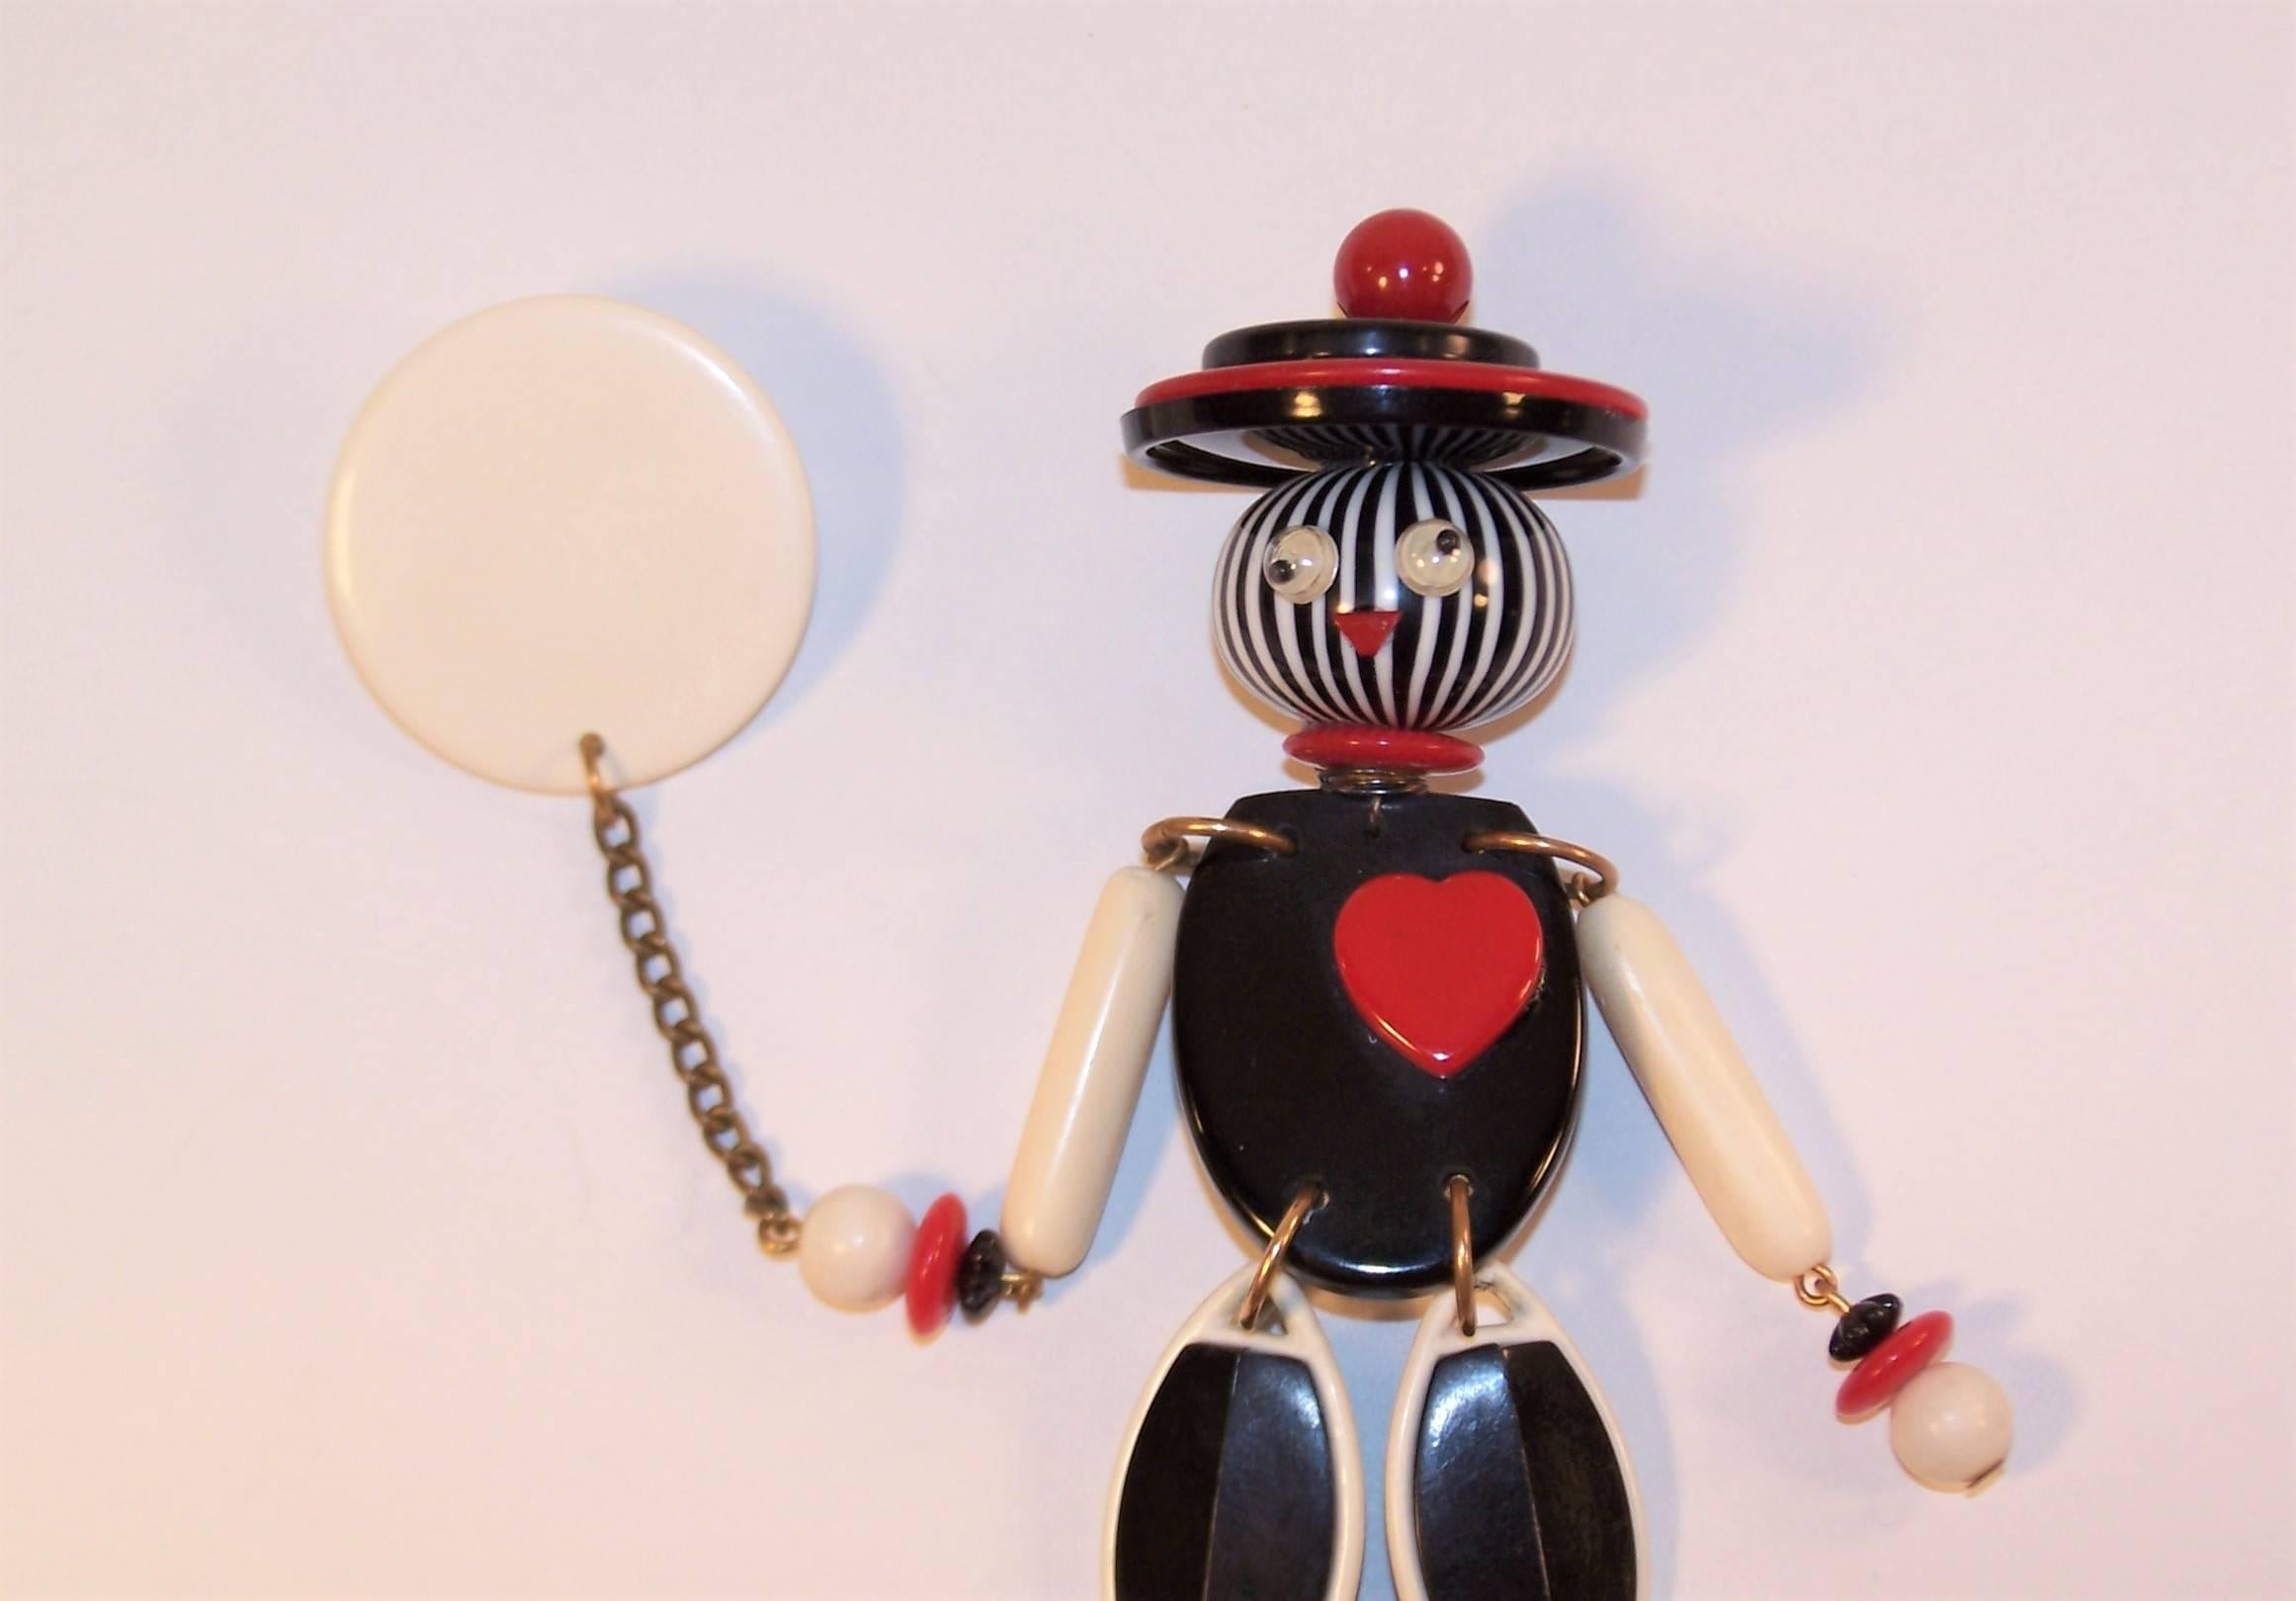 Retro Adorably Animated C.1950 Bakelite Articulated Figural Brooch